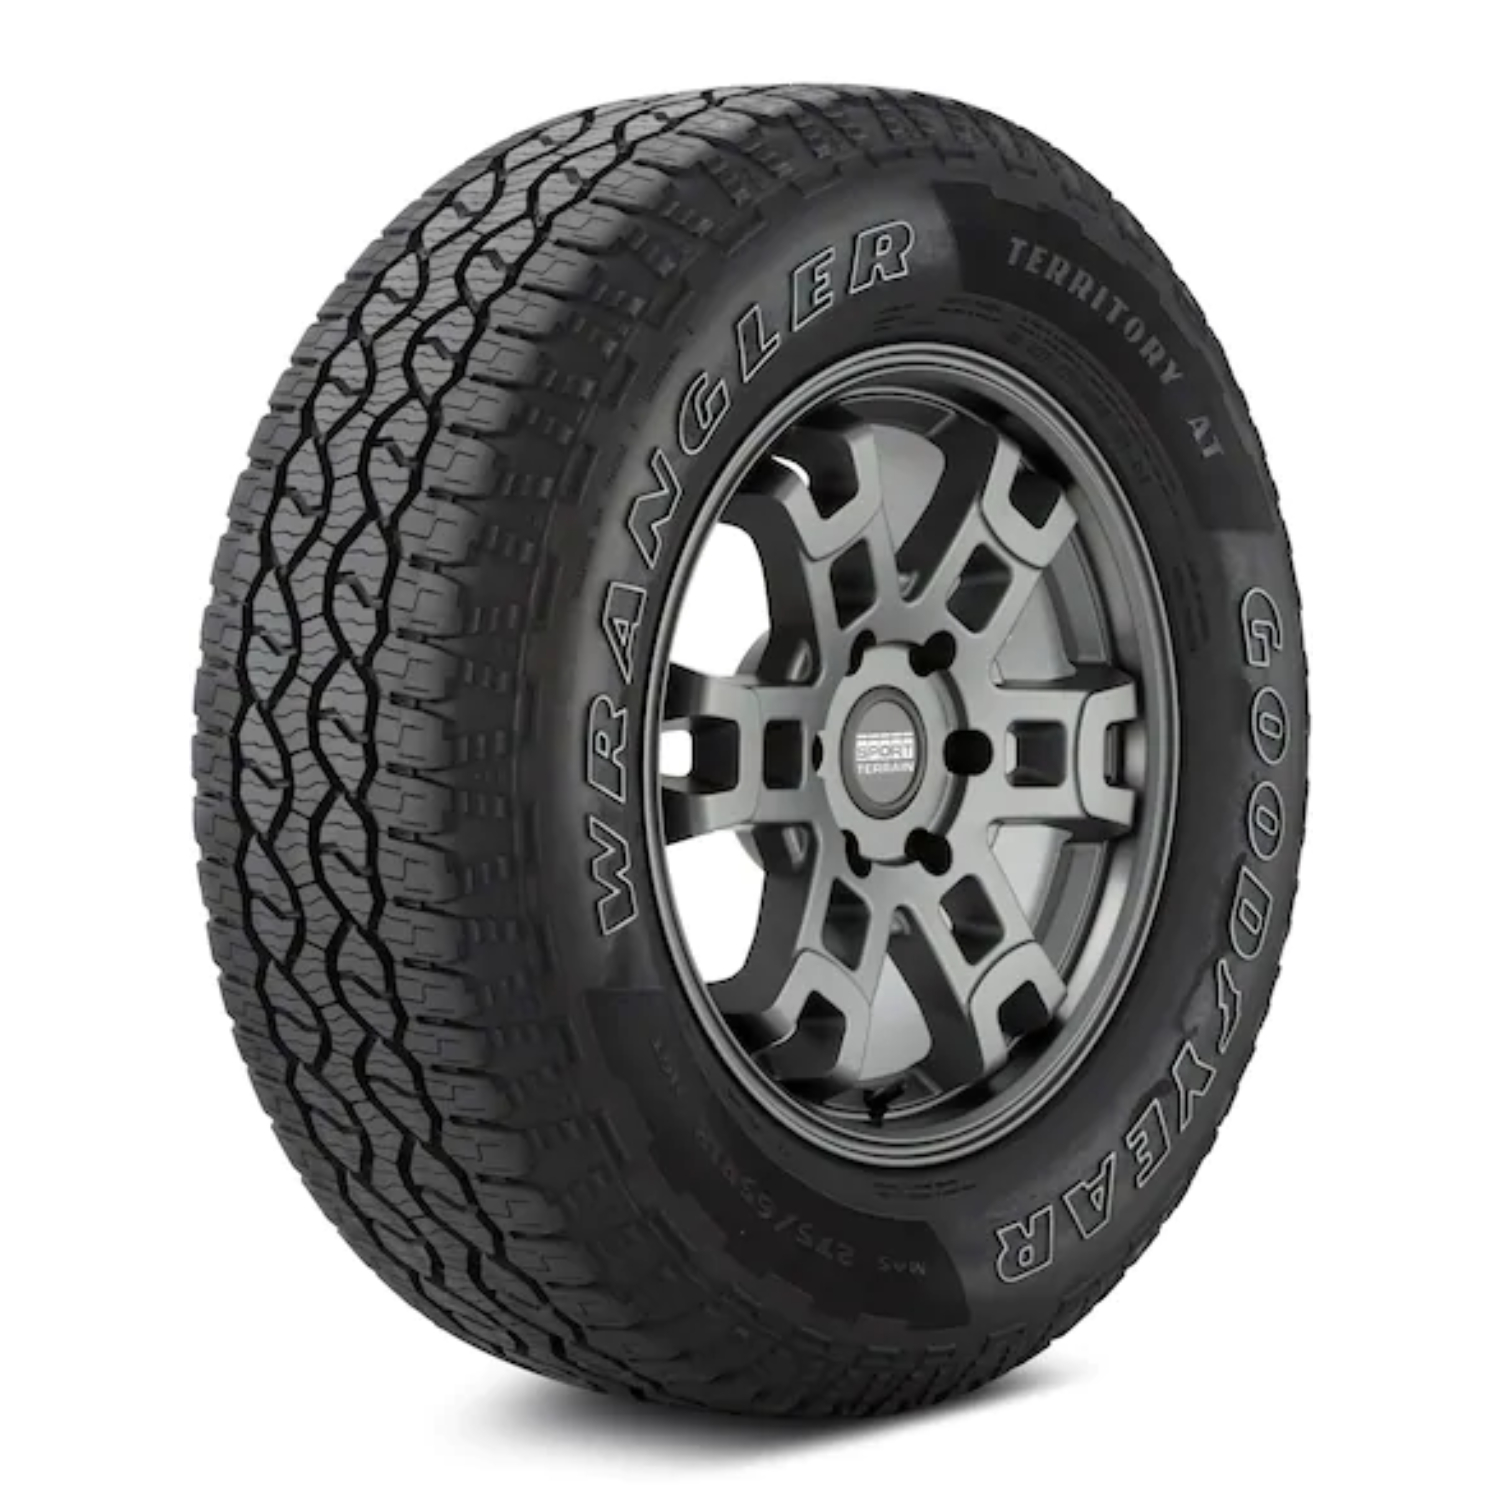  | GOODYEAR WRL TERRITORY AT/S 265/70R18 (687070885)